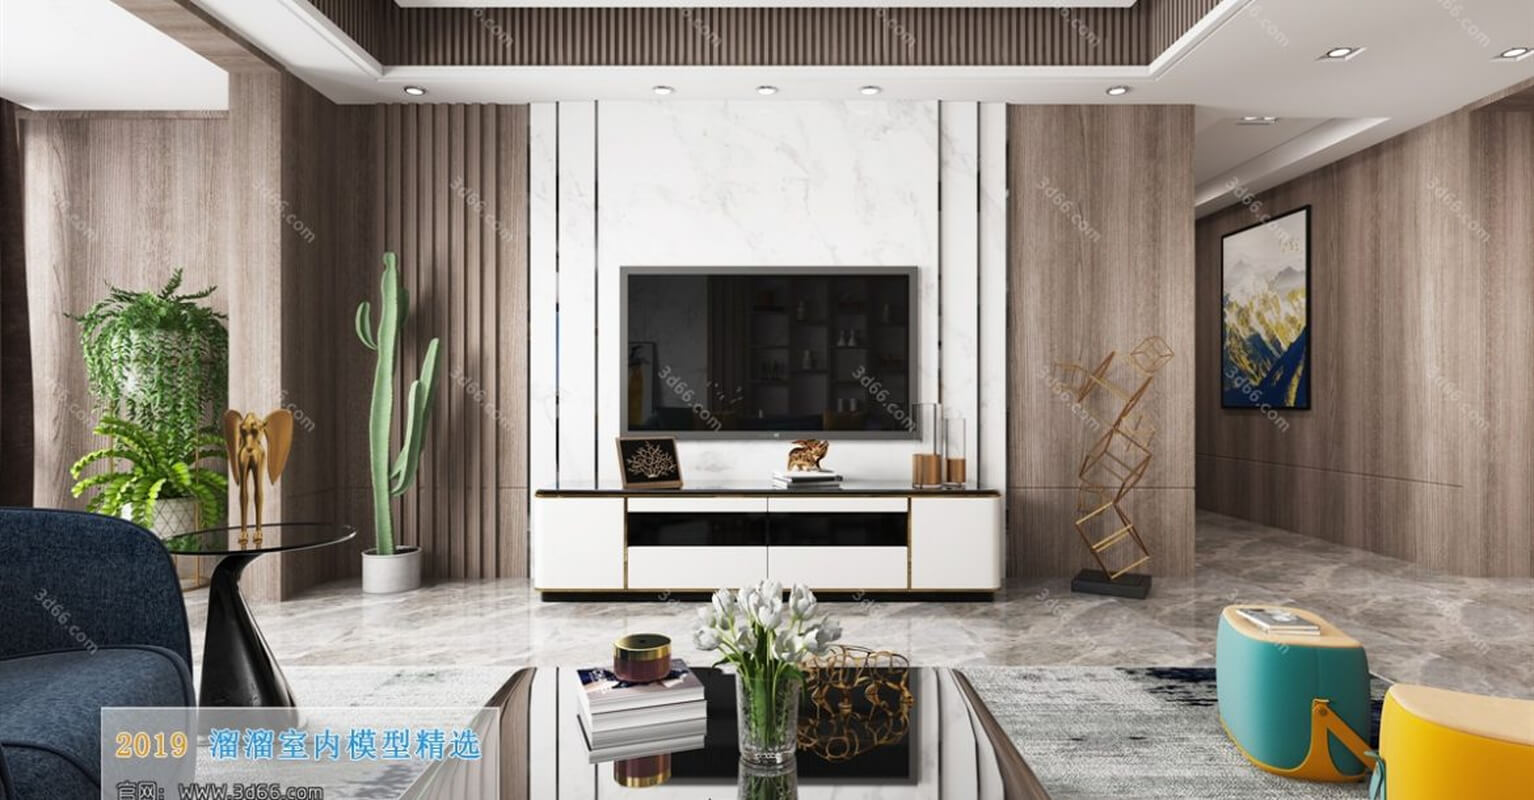 3D66 Living Room Interior 2019 Style (11)